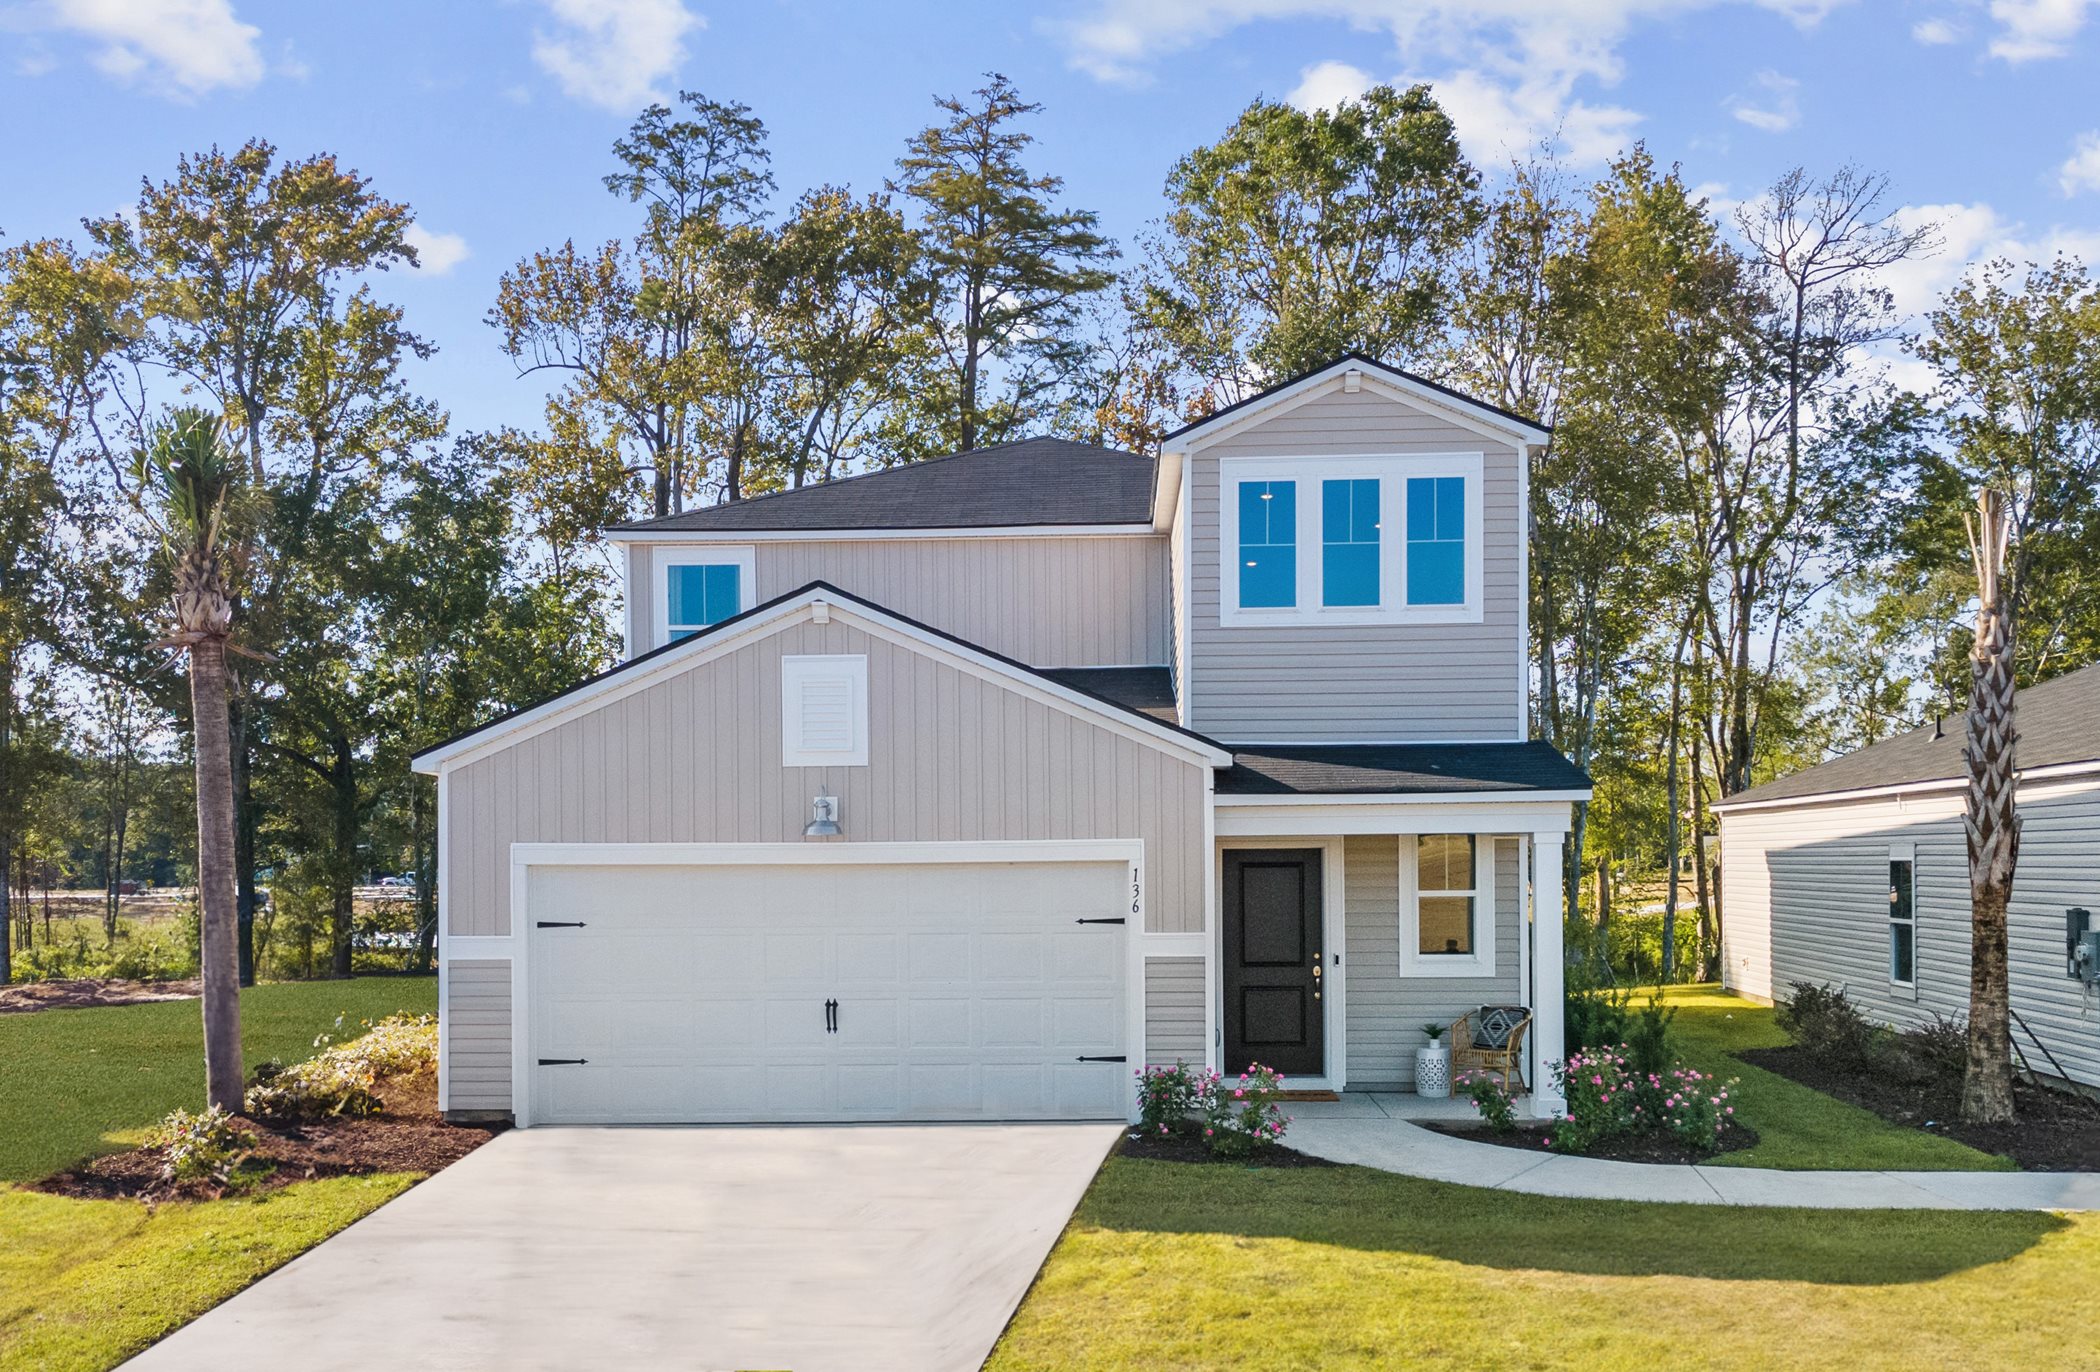 New Homes for Sale in Myrtle Beach